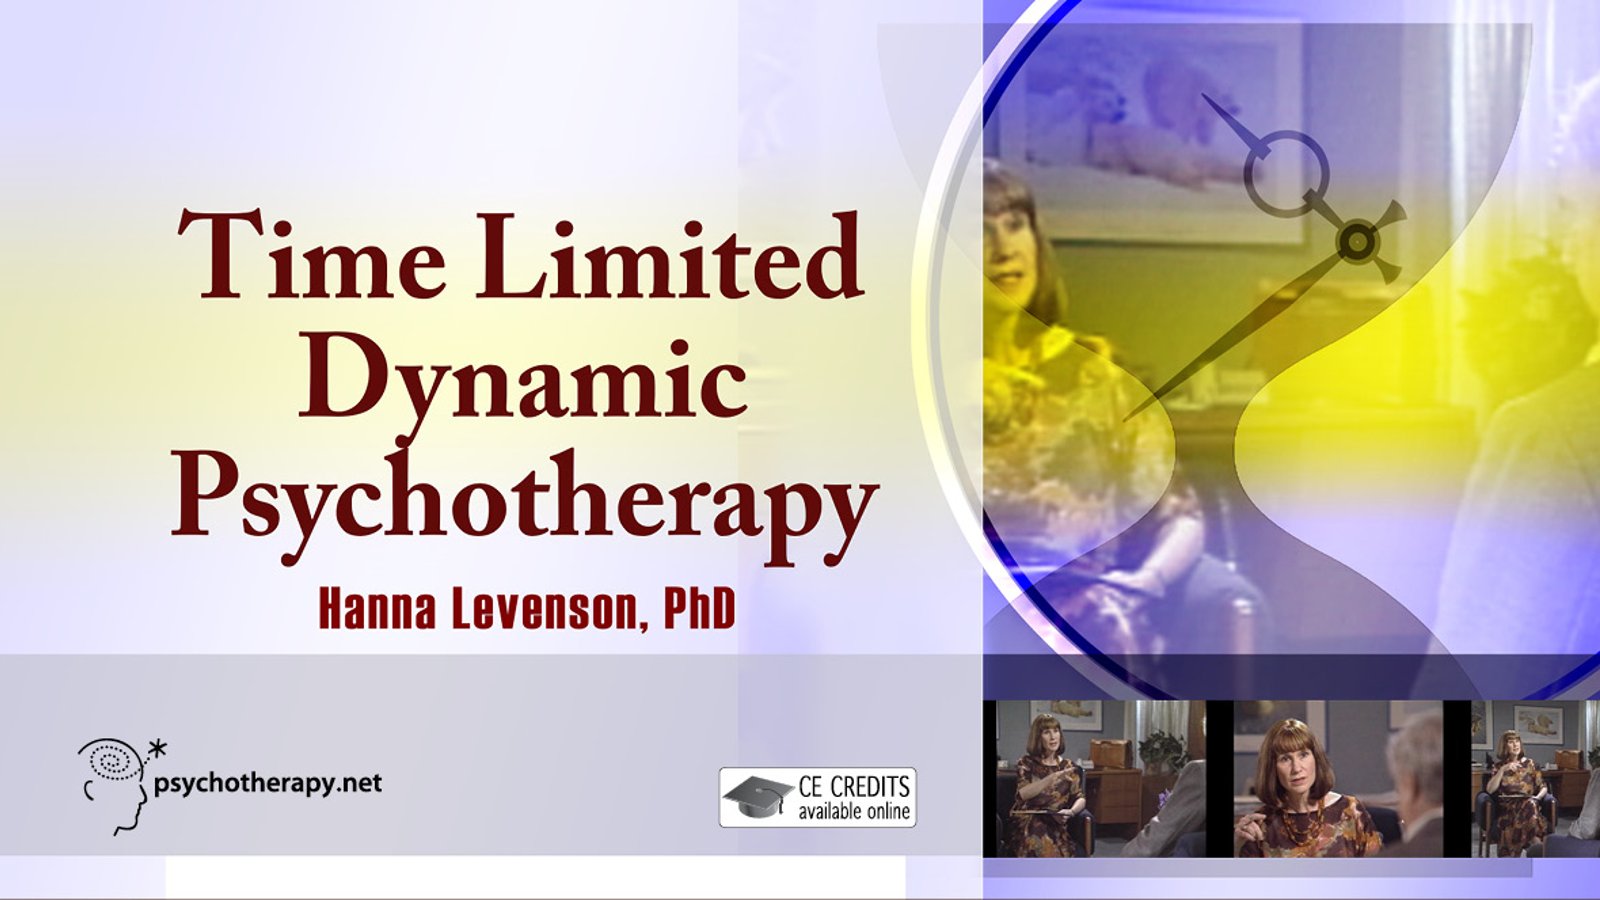 Time Limited Dynamic Psychotherapy - With Hanna Levenson